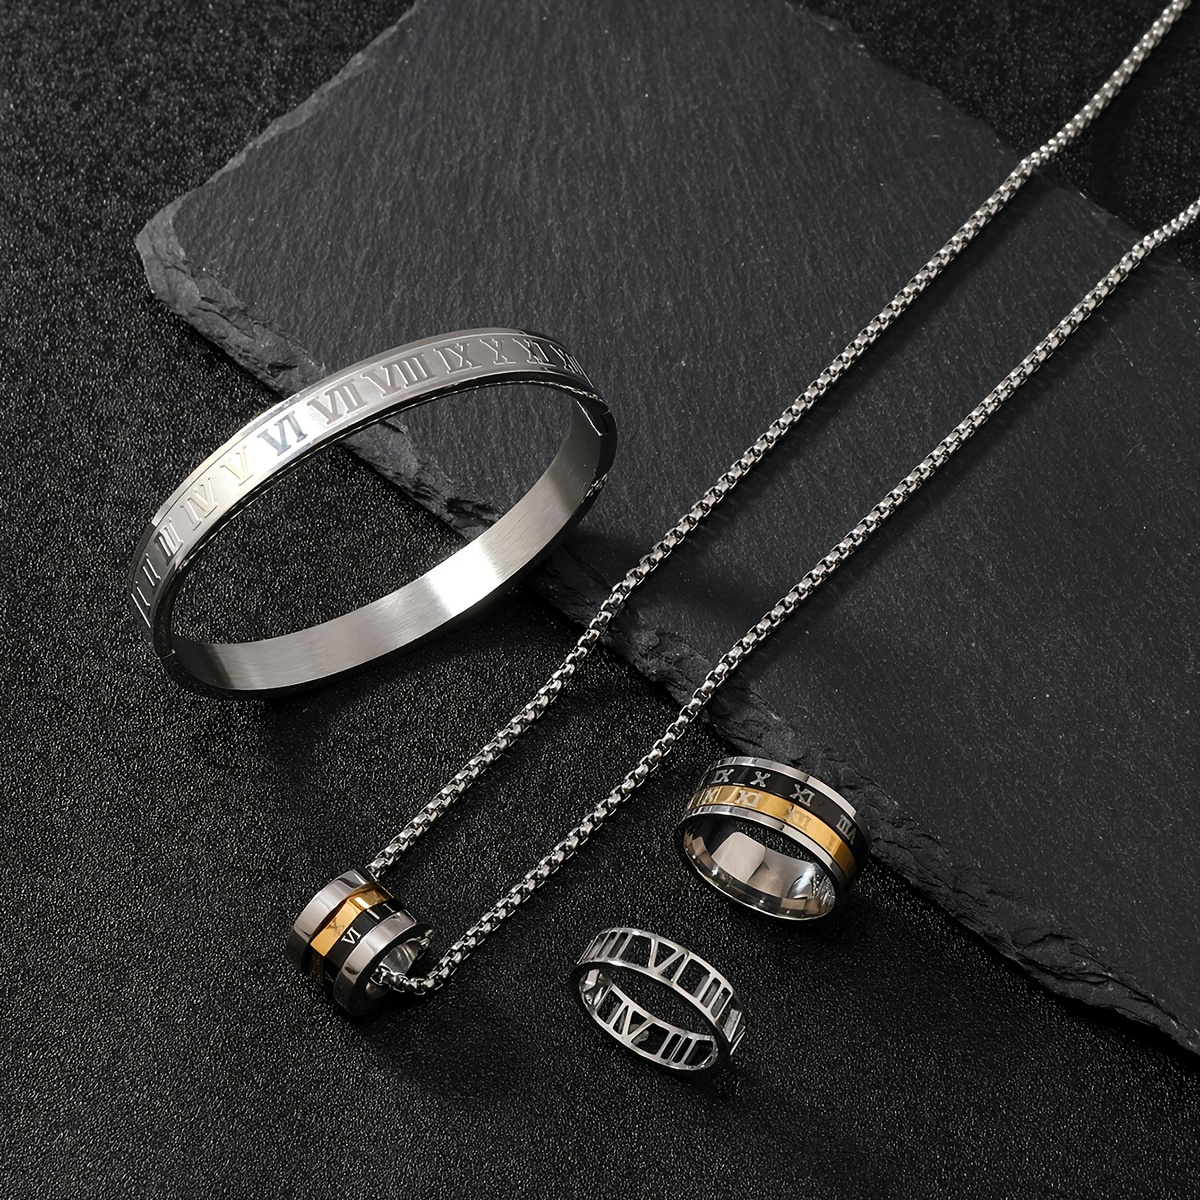 Rose Gold and Black Men's Jewelry Set in Silver